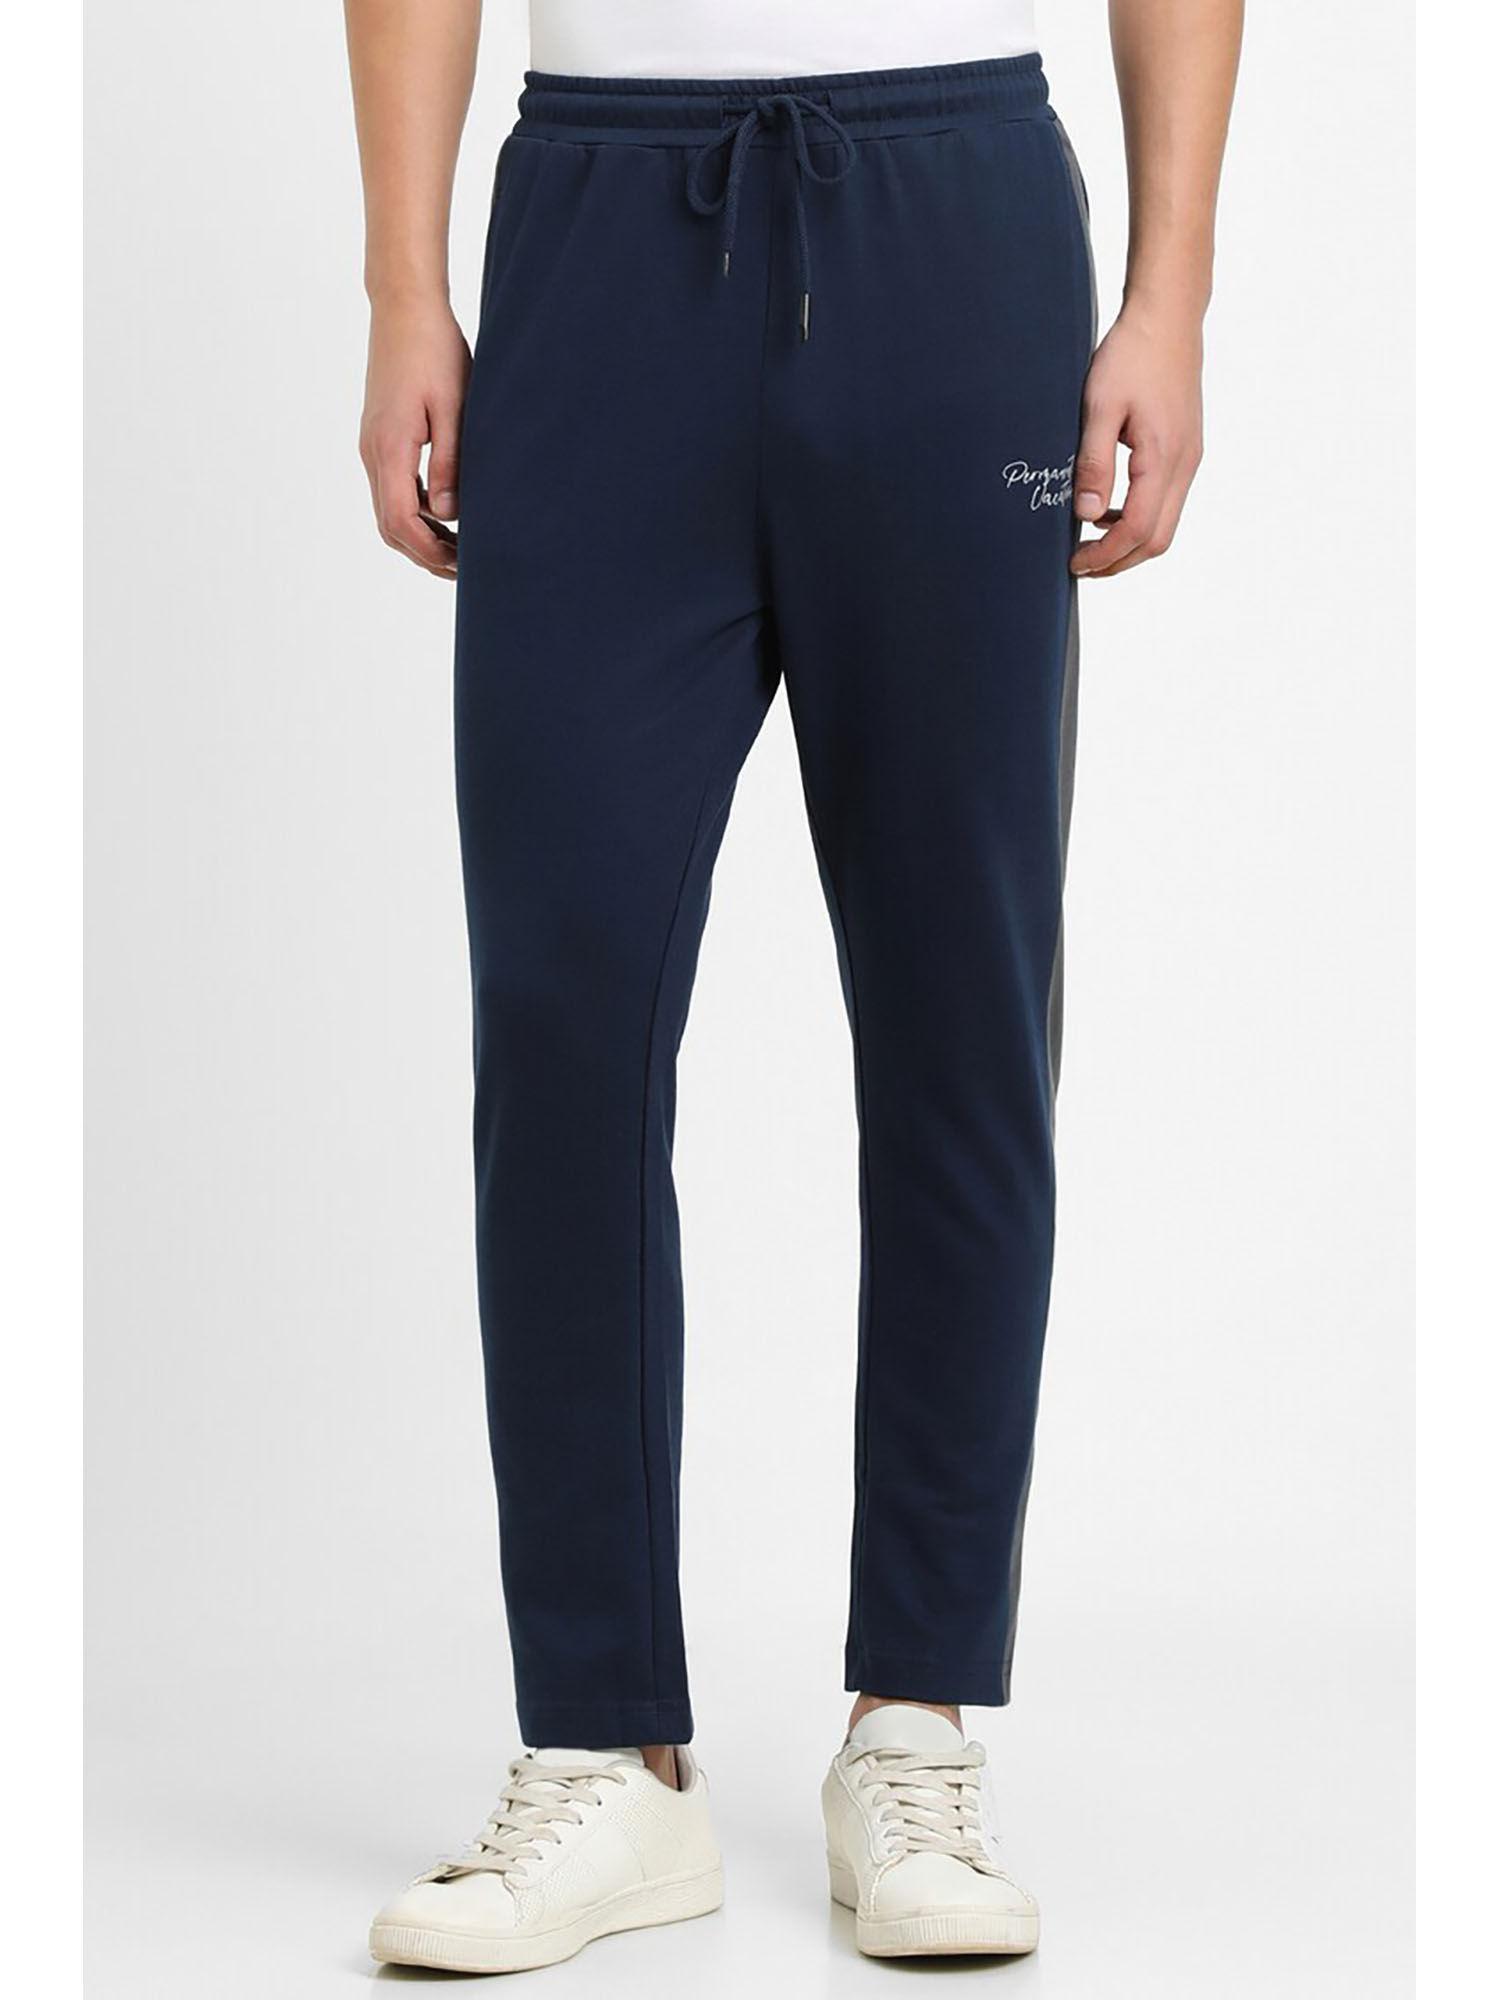 navy-blue-solid-track-pant